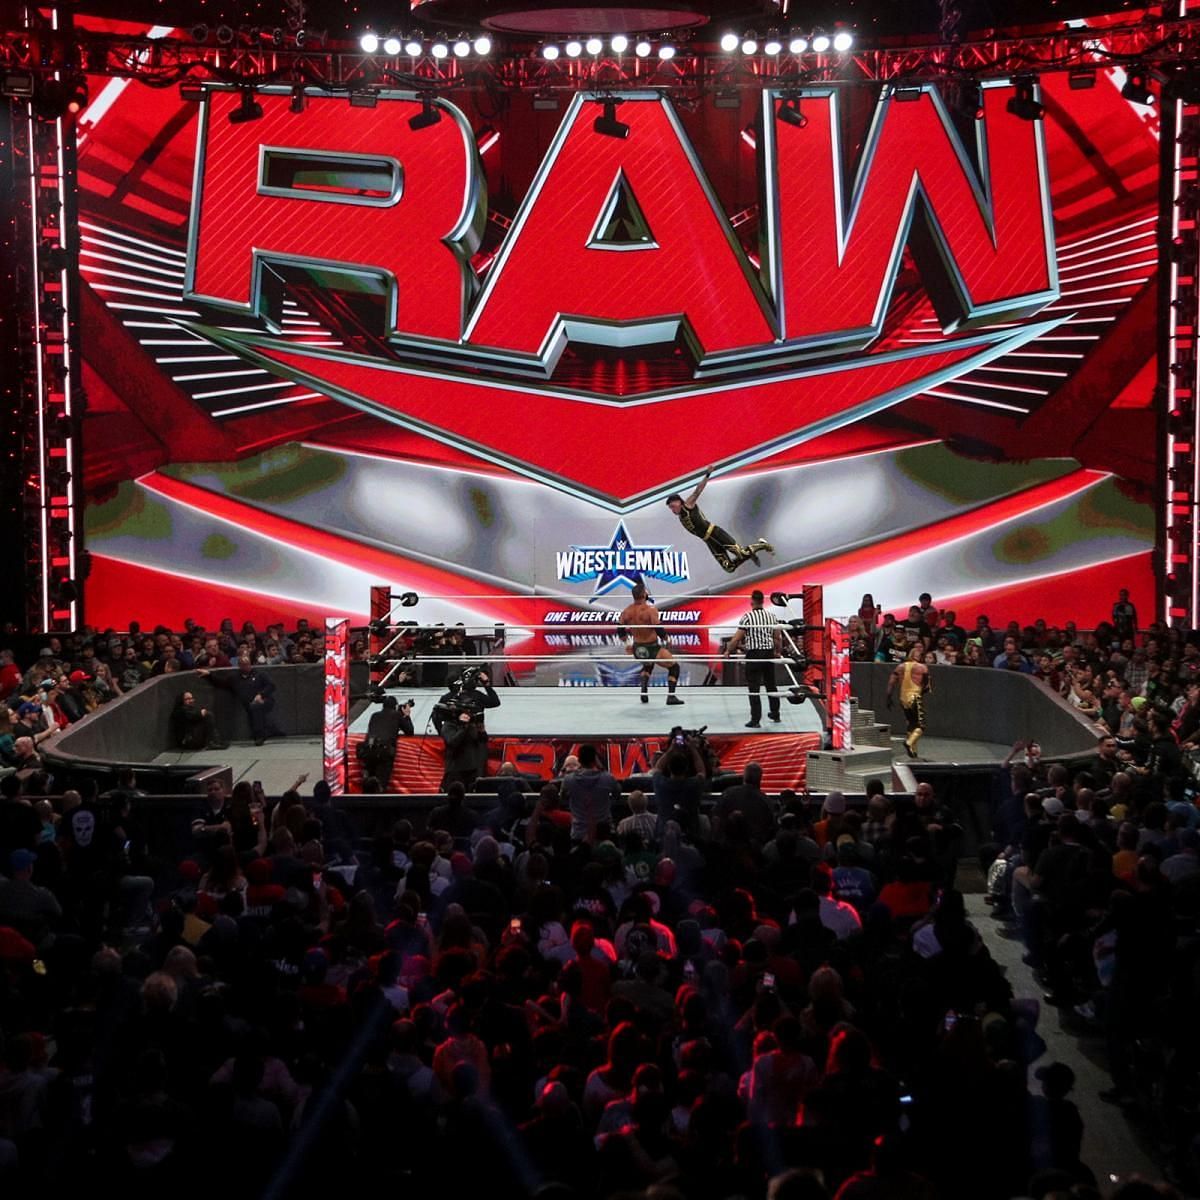 WWE&#039;s flagship program takes place every Monday Night